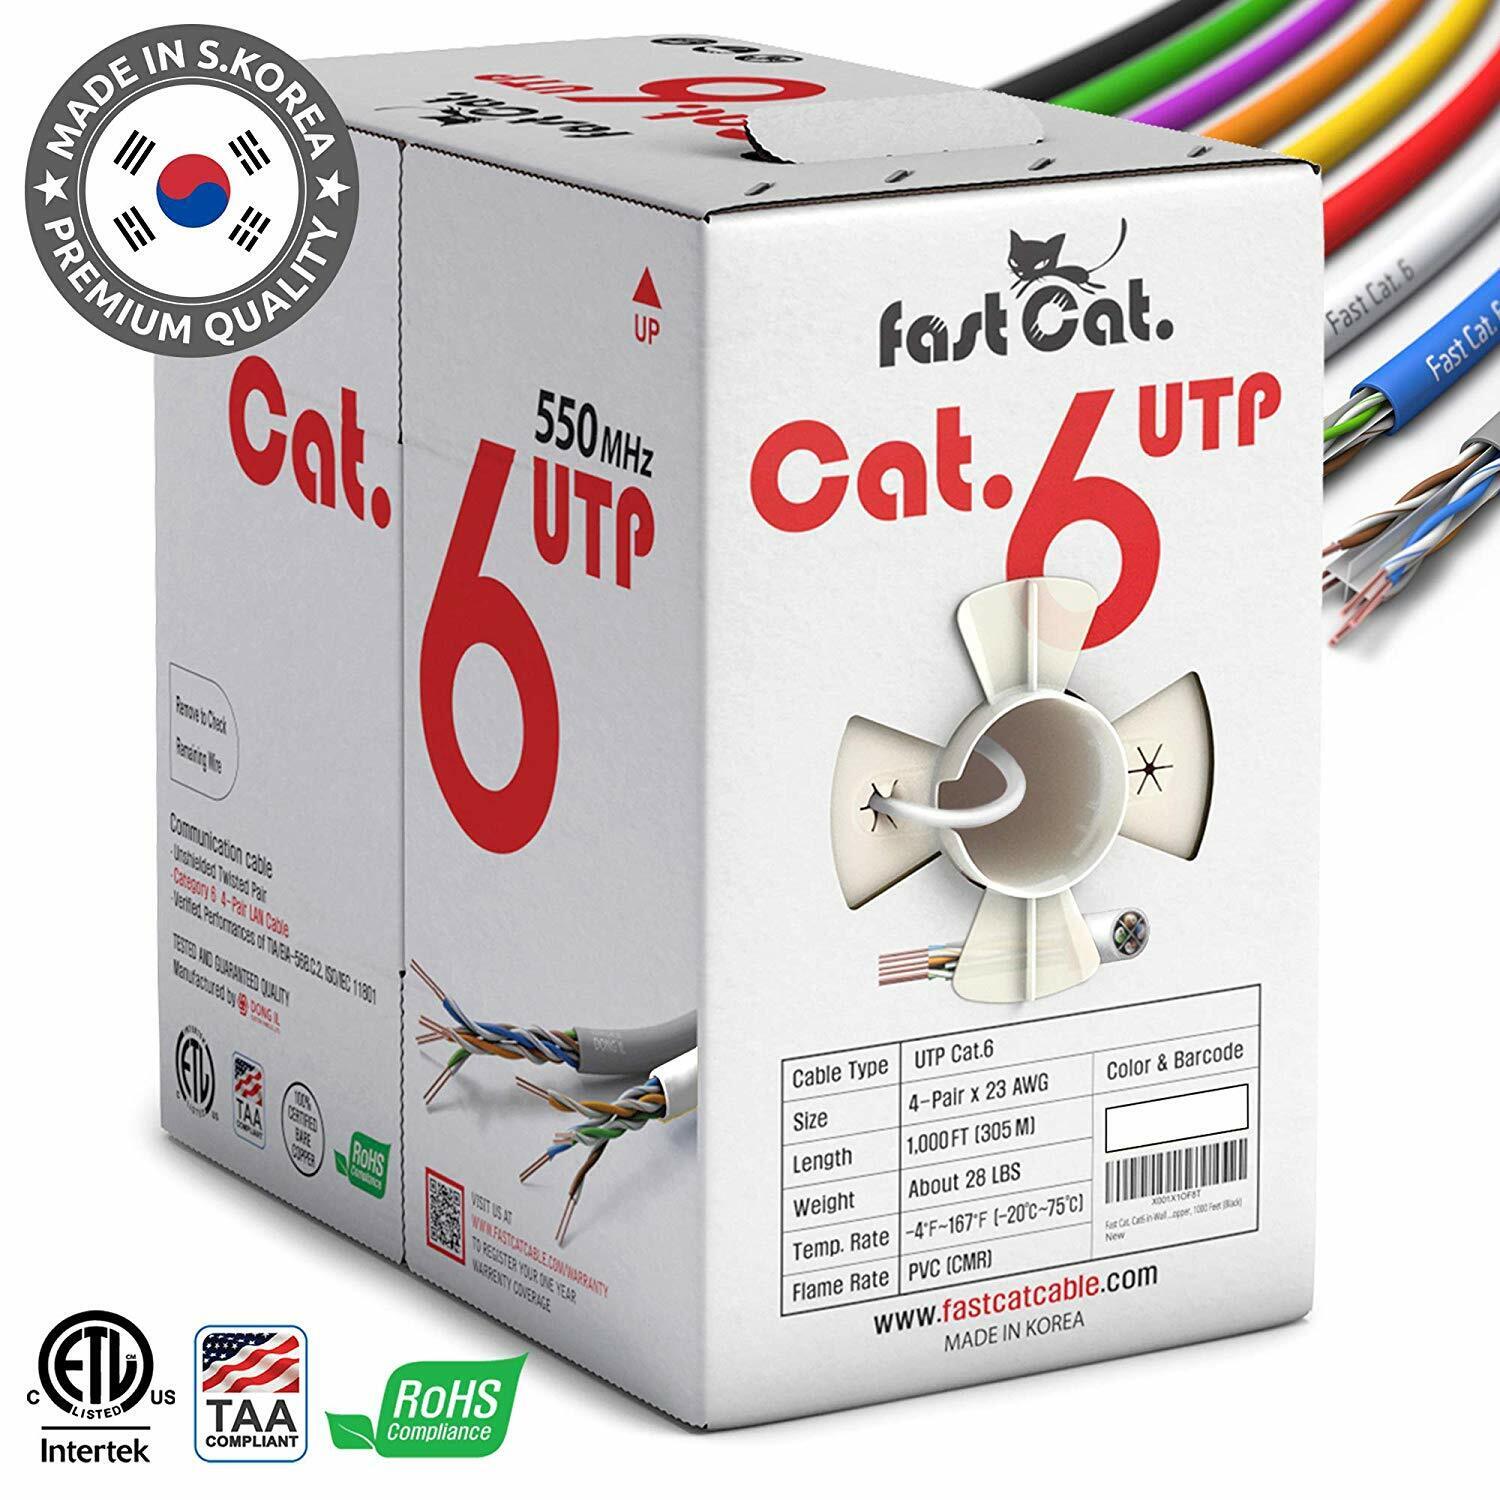 fast Cat. Cat6 Copper Ethernet Cable 1000ft - 23 AWG, CMR, 550MHZ / 10GB UTP LAN